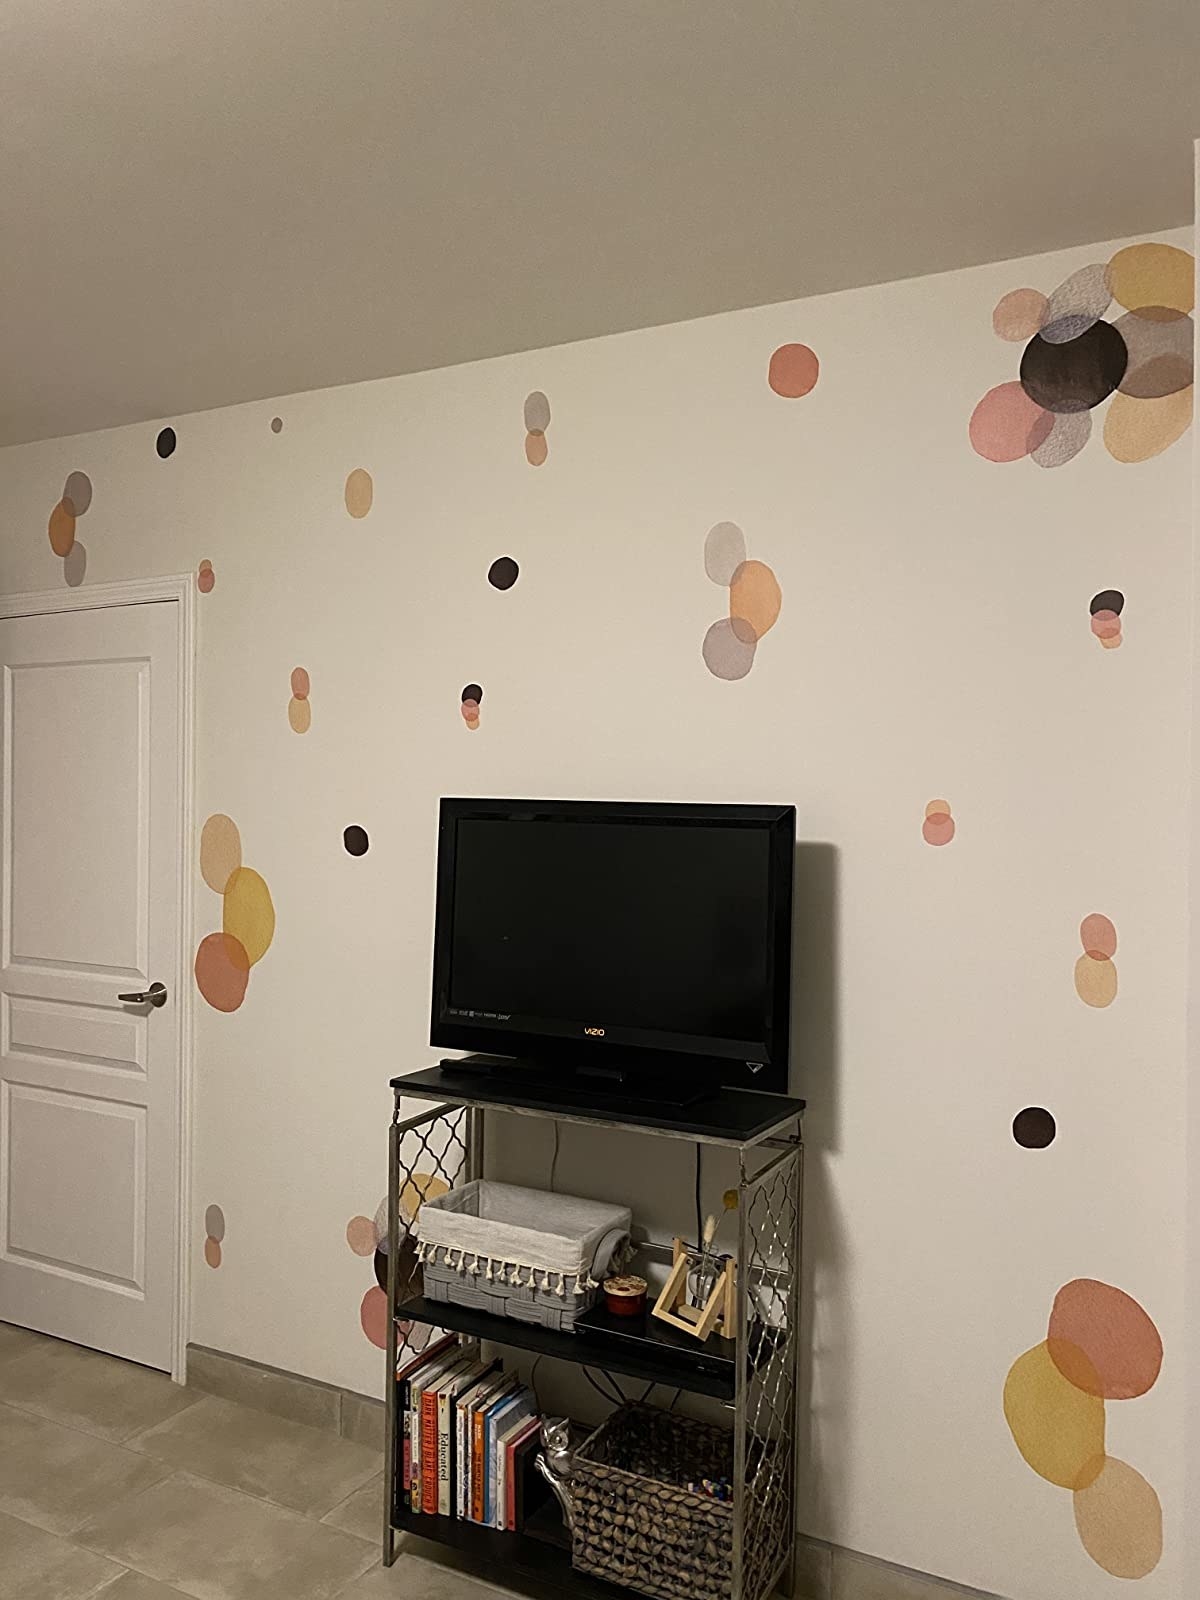 reviewer image of several abstract watercolor decals on a wall